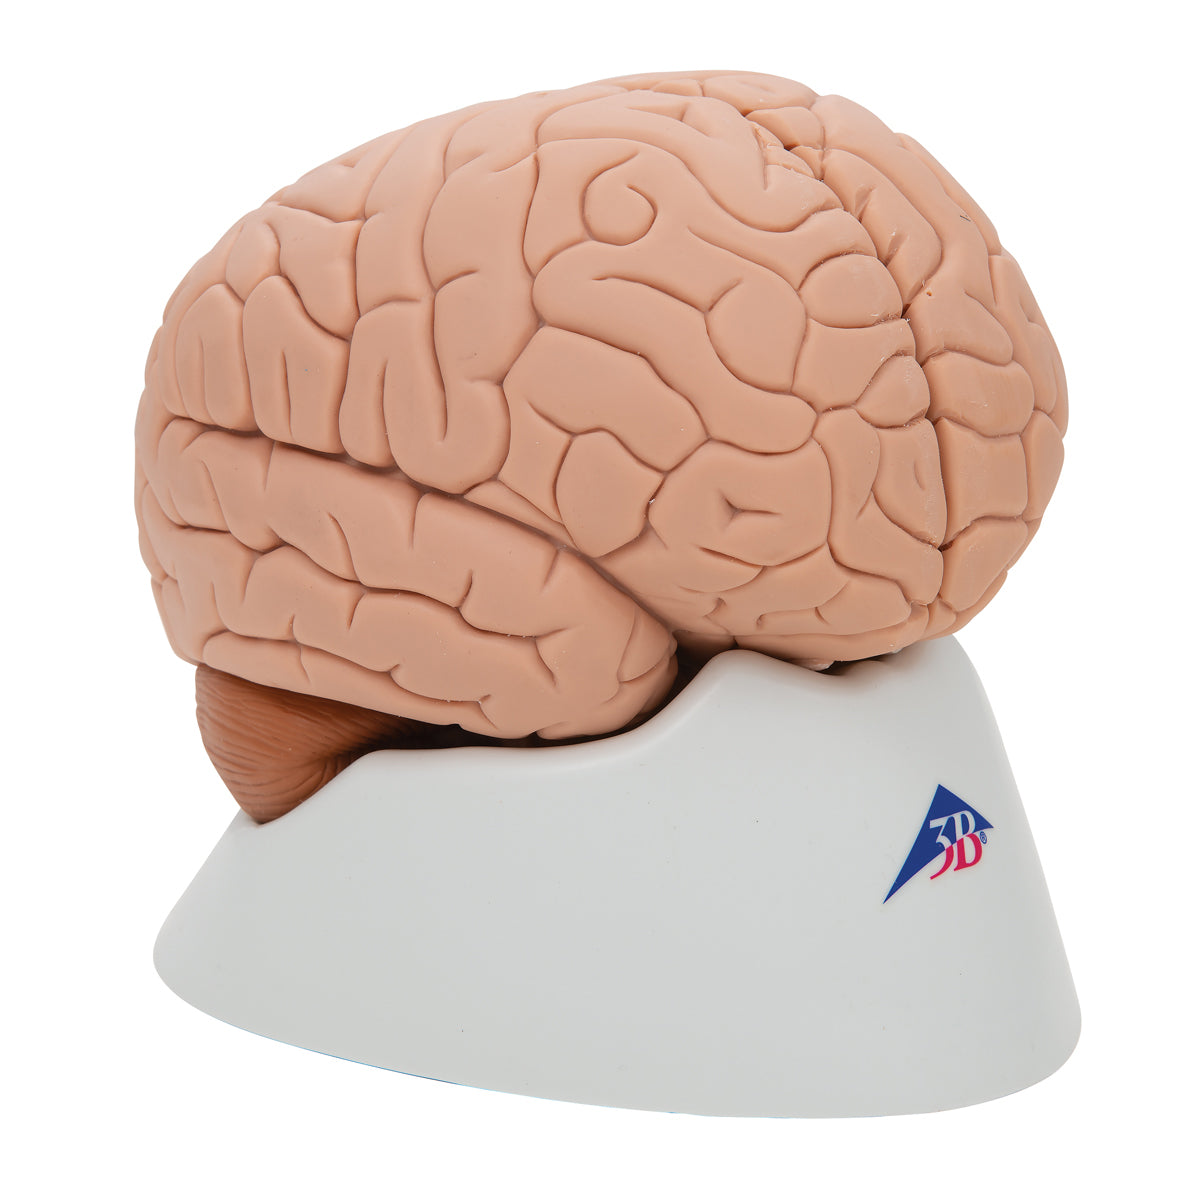 Anatomical brain model in 2 parts 